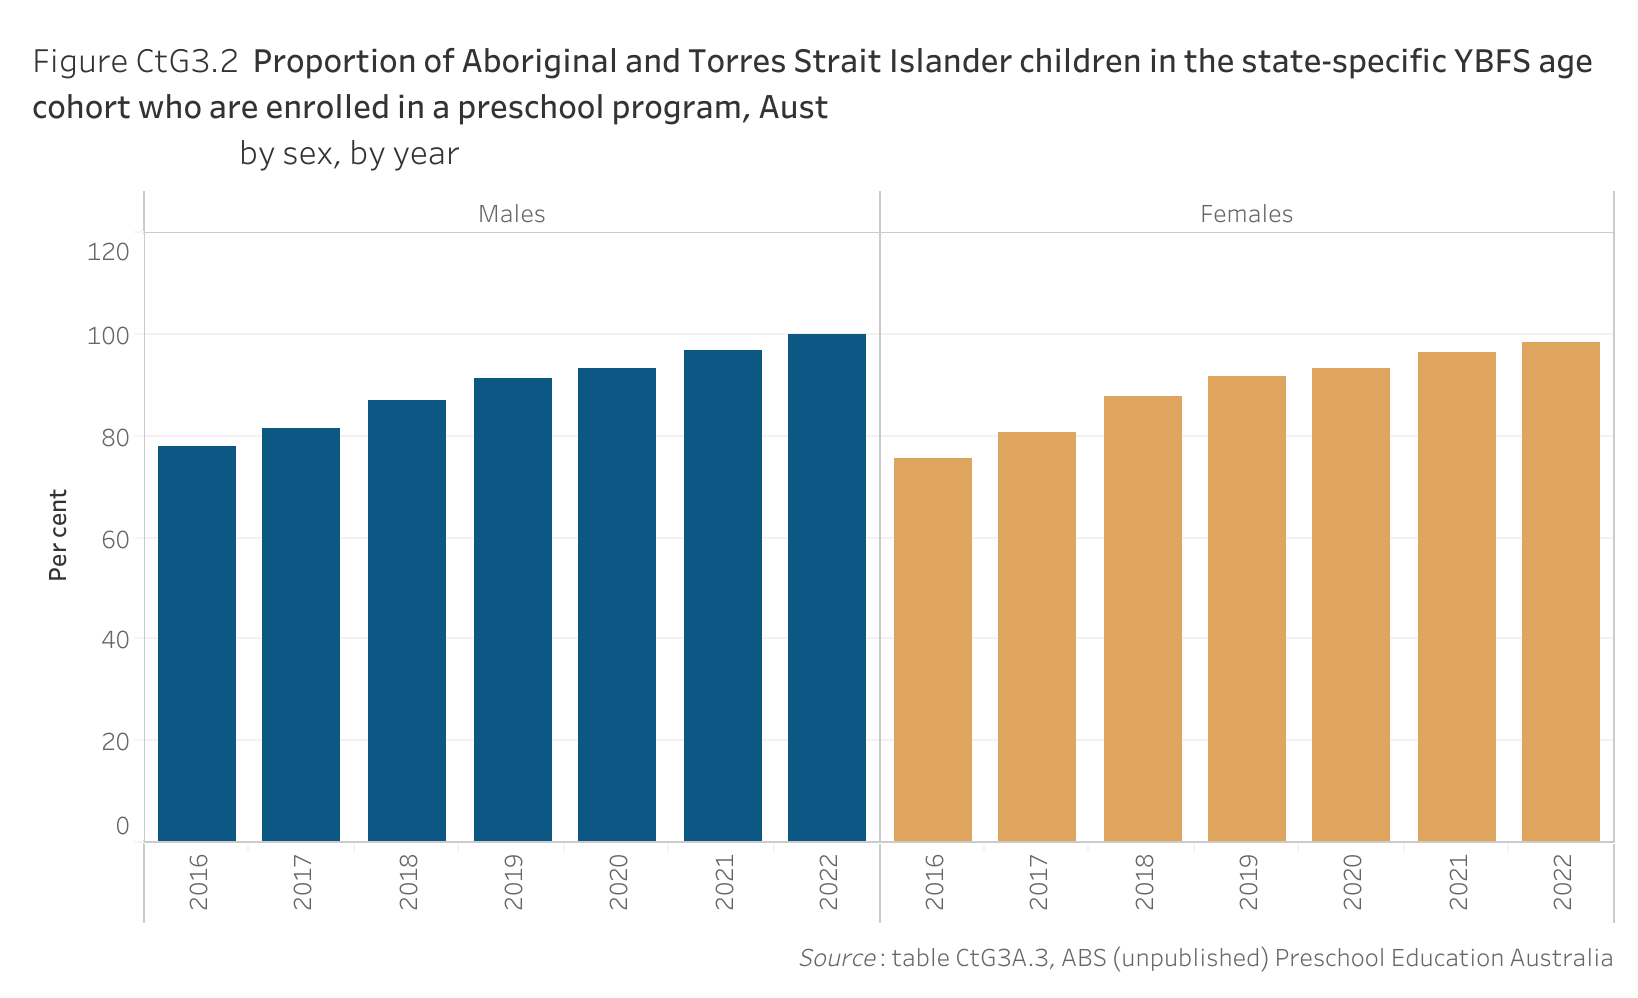 Figure CtG3.2 shows the proportion of Aboriginal and Torres Strait Islander children in the state-specific Year Before Full time Schooling age cohort who are enrolled in a preschool program, Australia, by sex, by year. More details can be found within the text near this image.